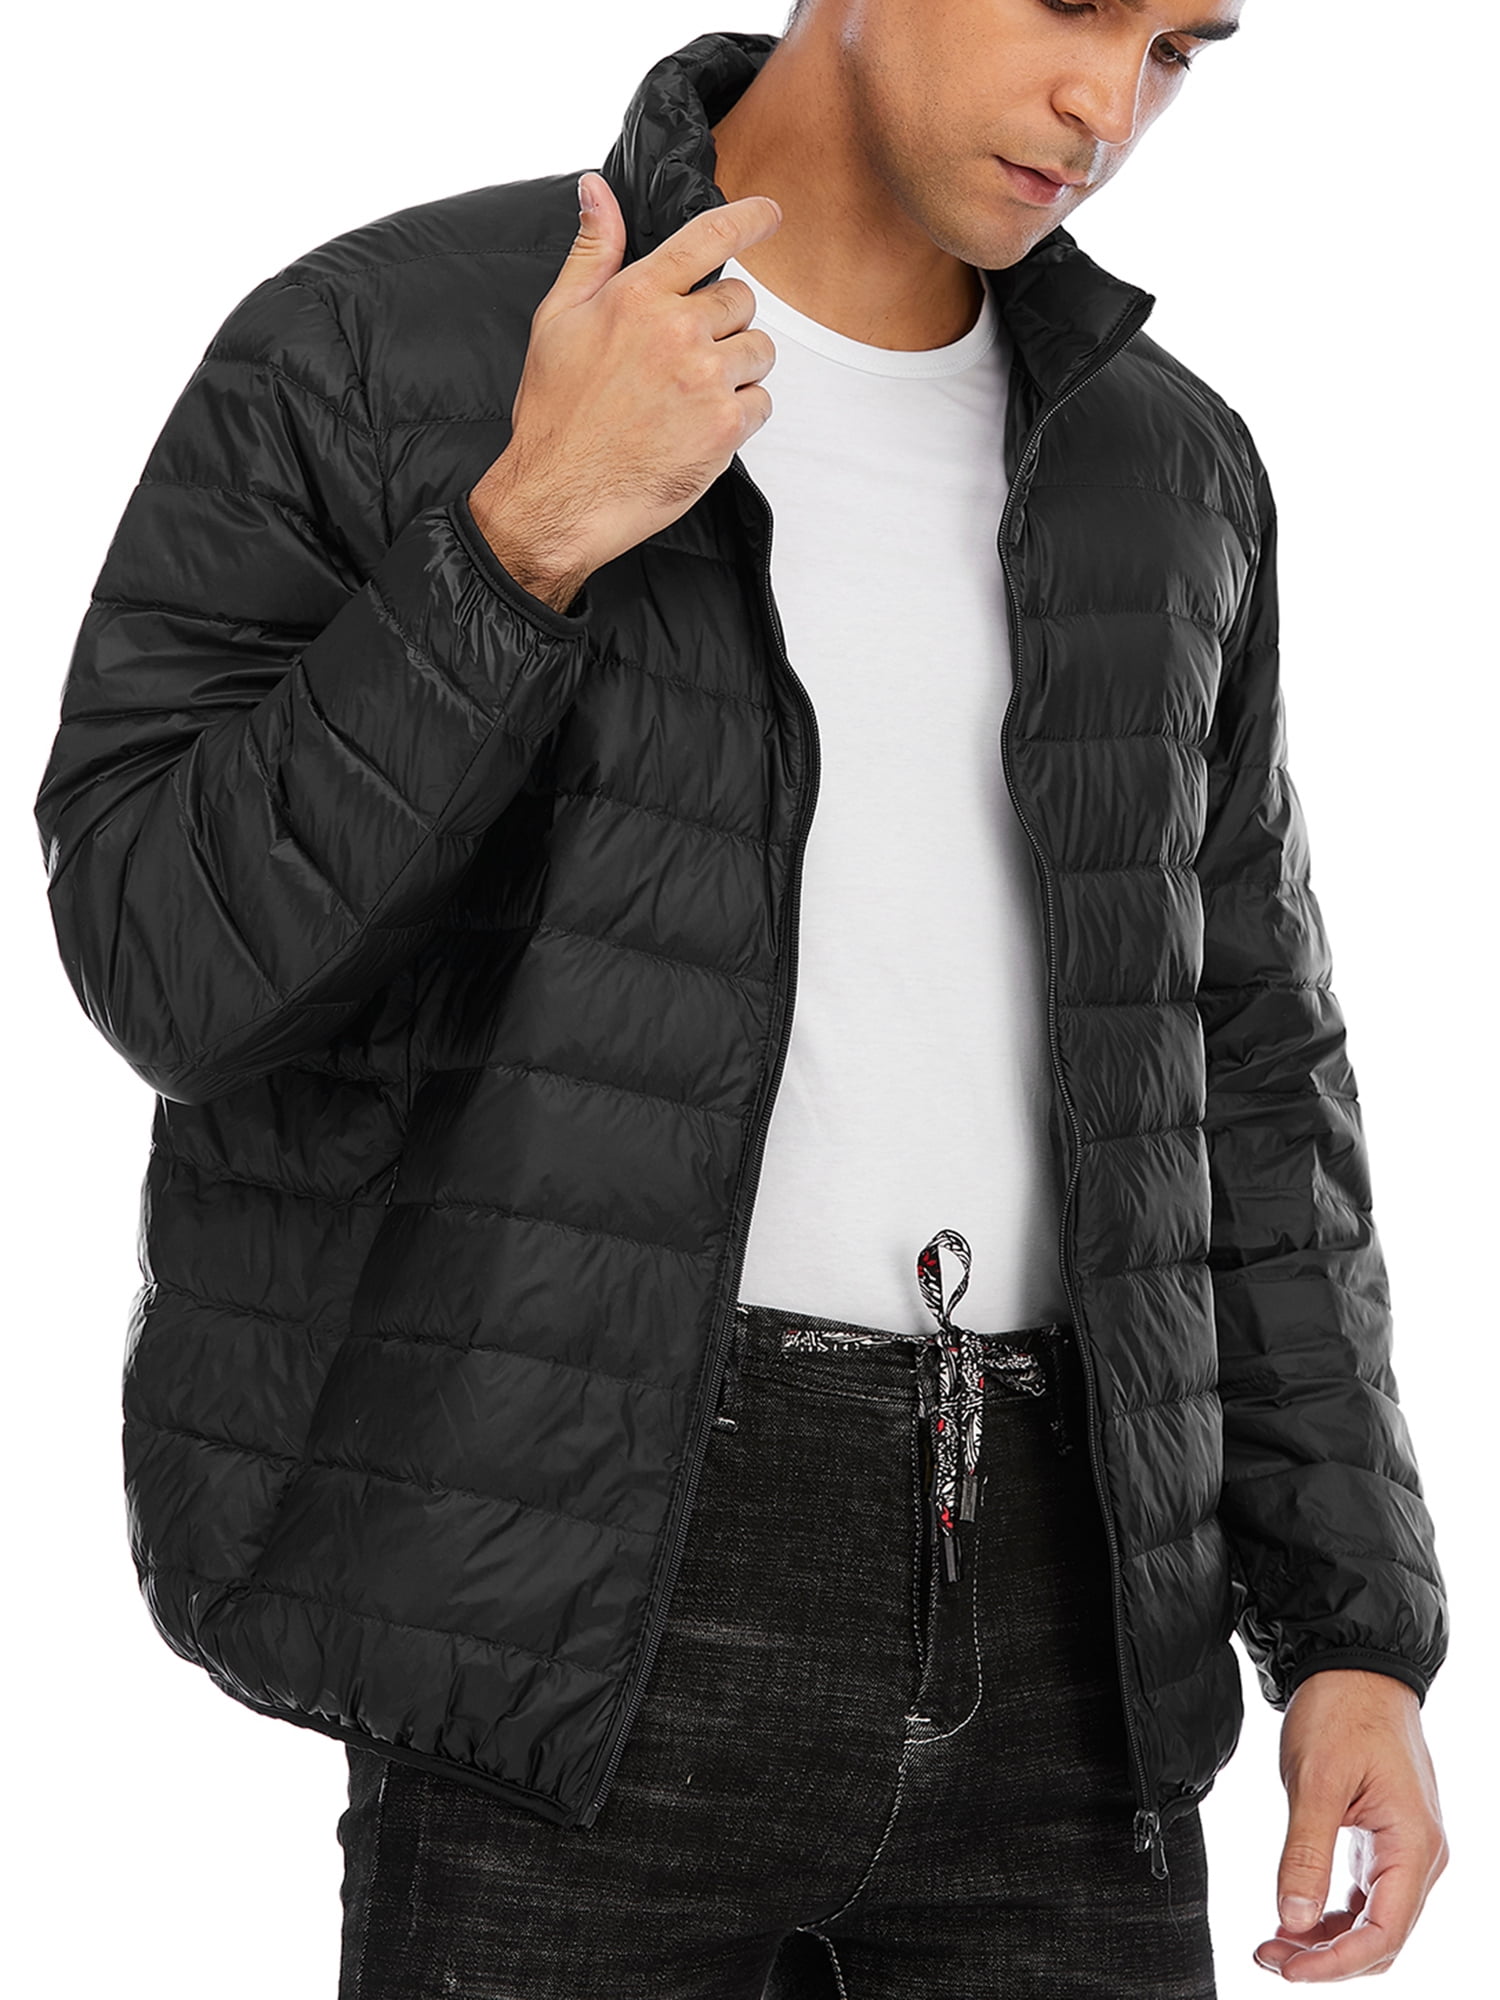 fit space Mens Down Alternative Jacket Quilted Lightweight Packable Padding Coat with Detachable Hood 